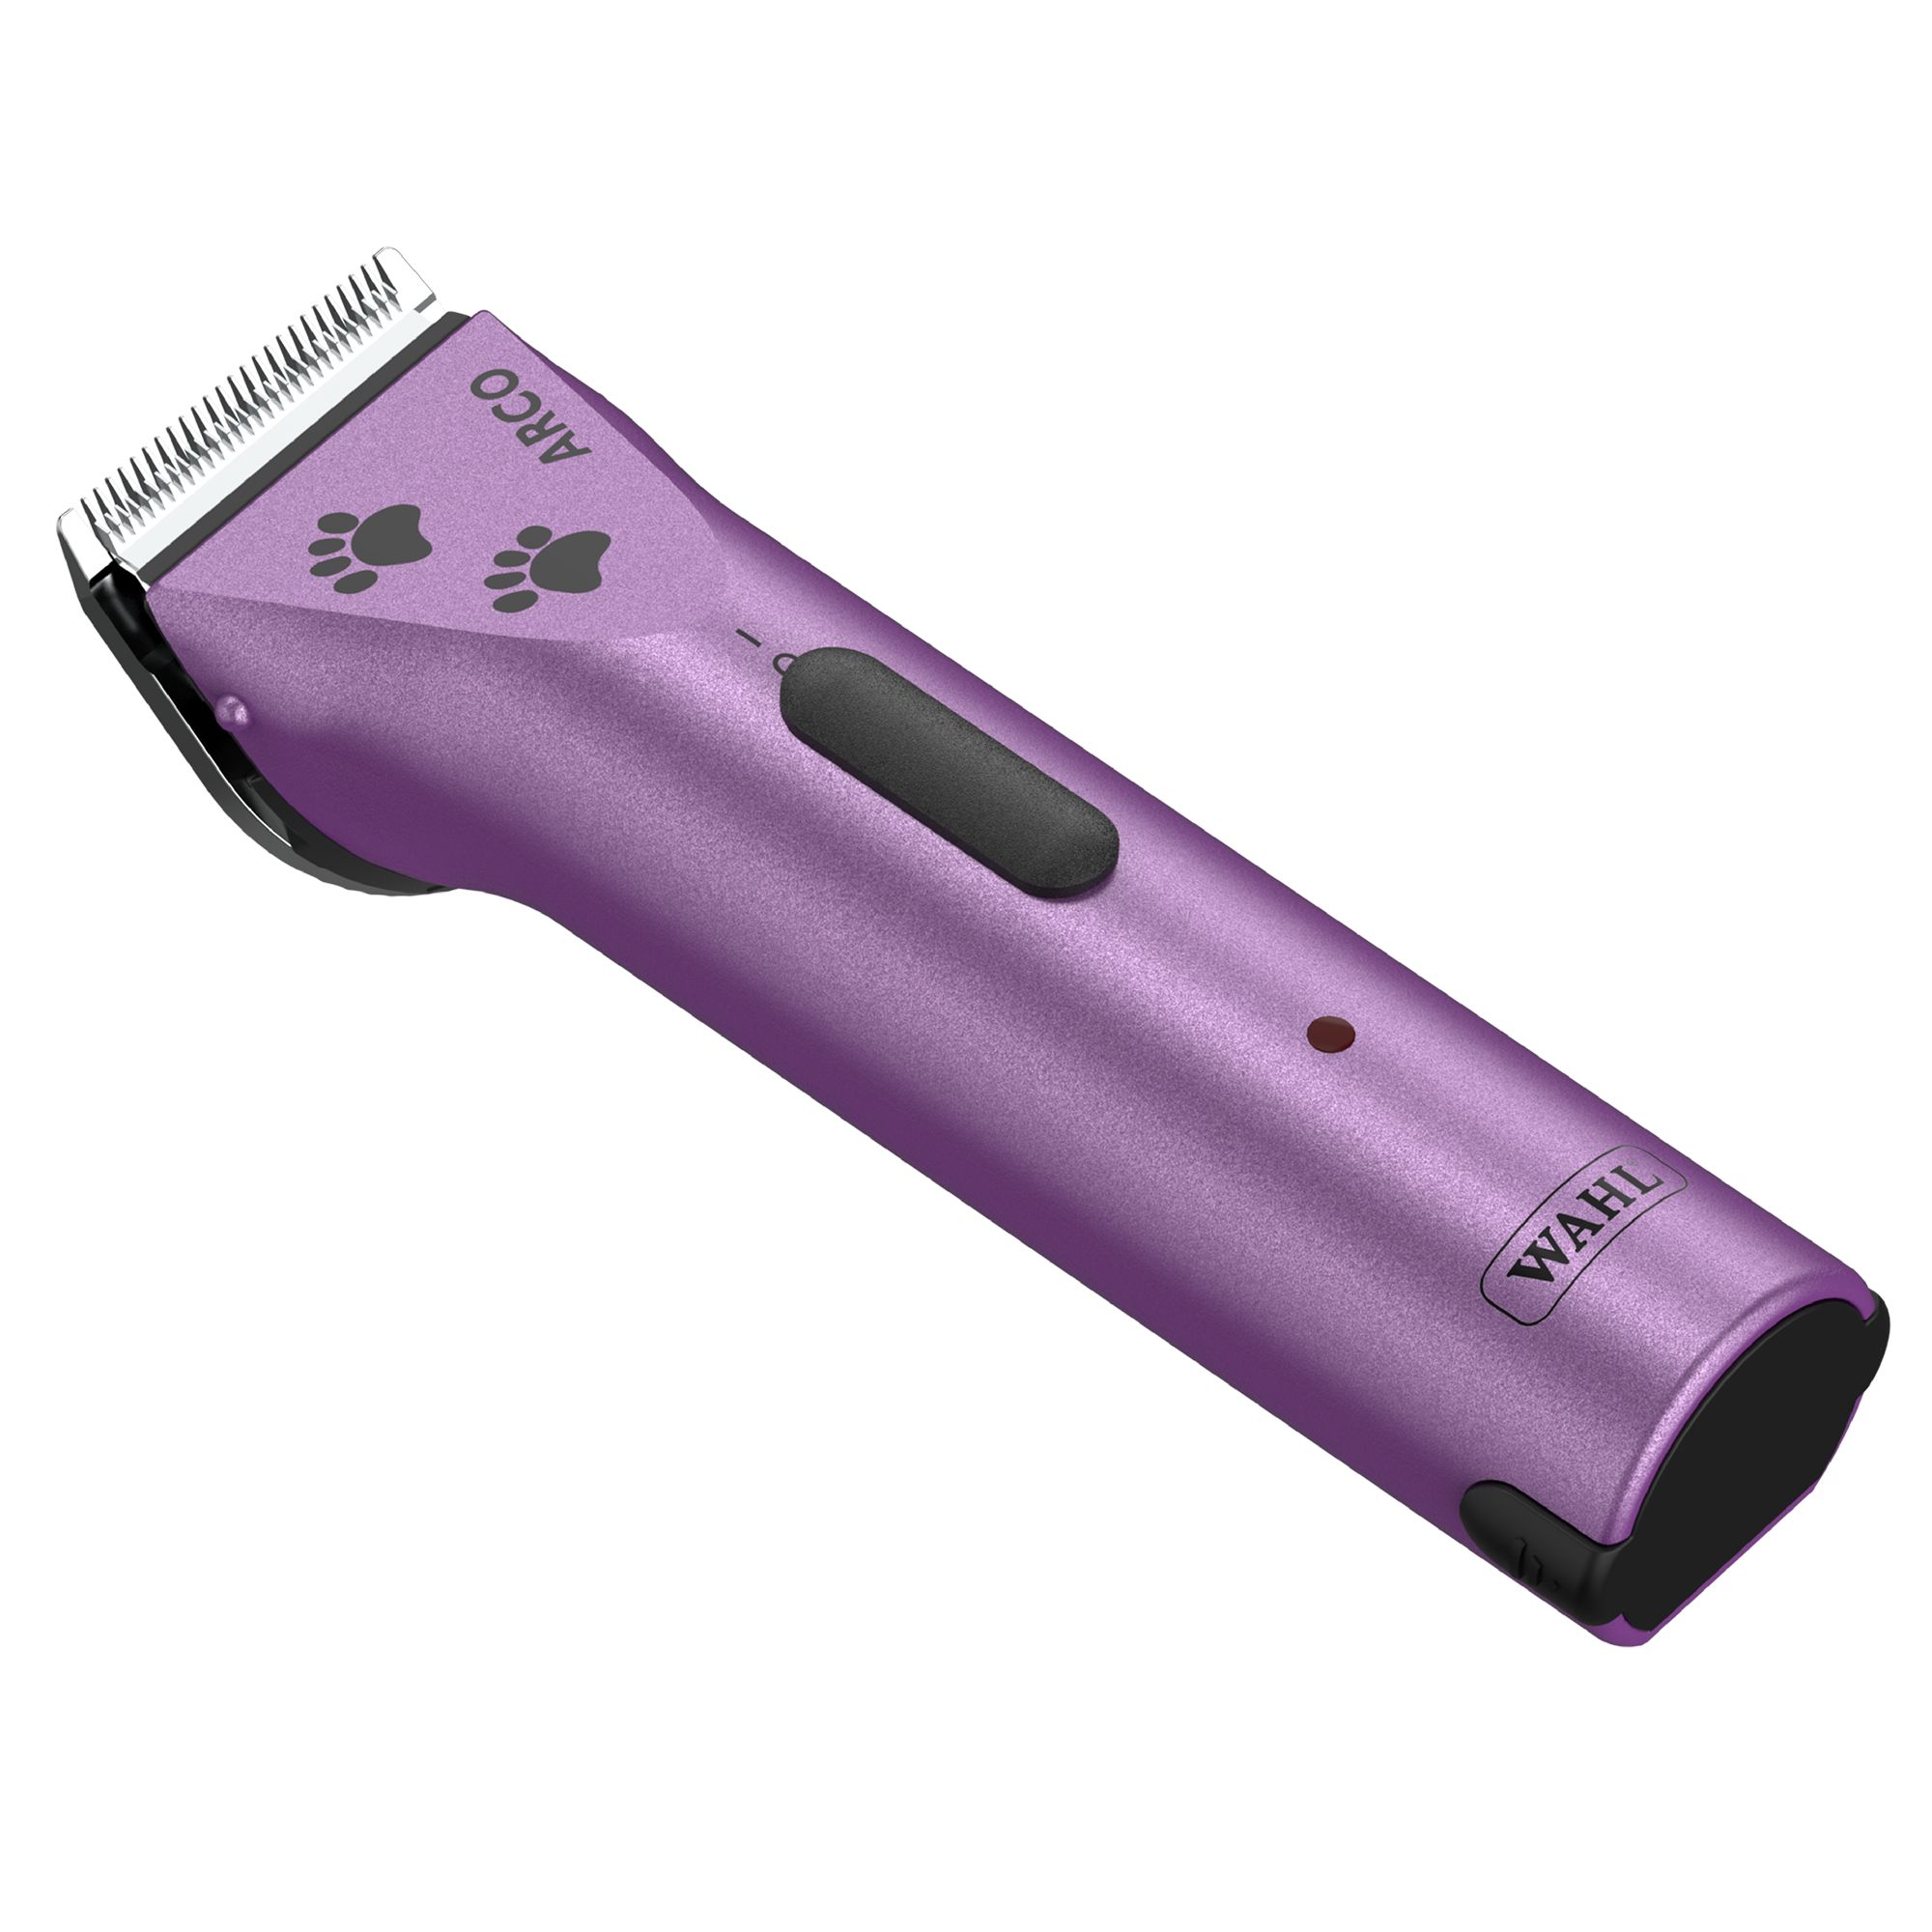 cordless hair clippers canada